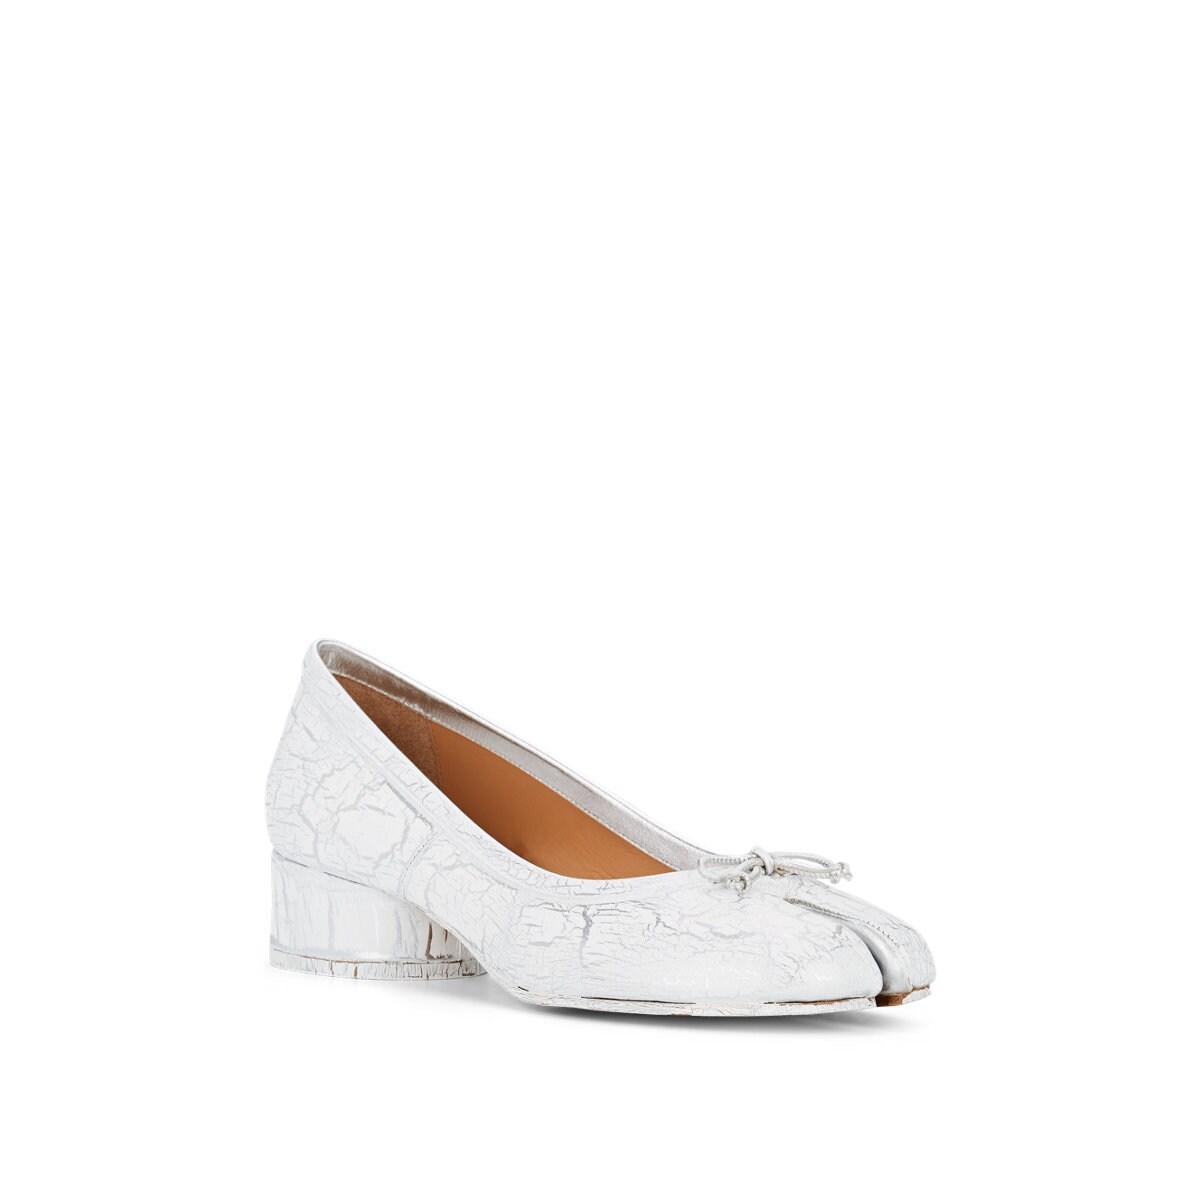 Maison Margiela Tabi Crackled Leather Pumps in White - Lyst